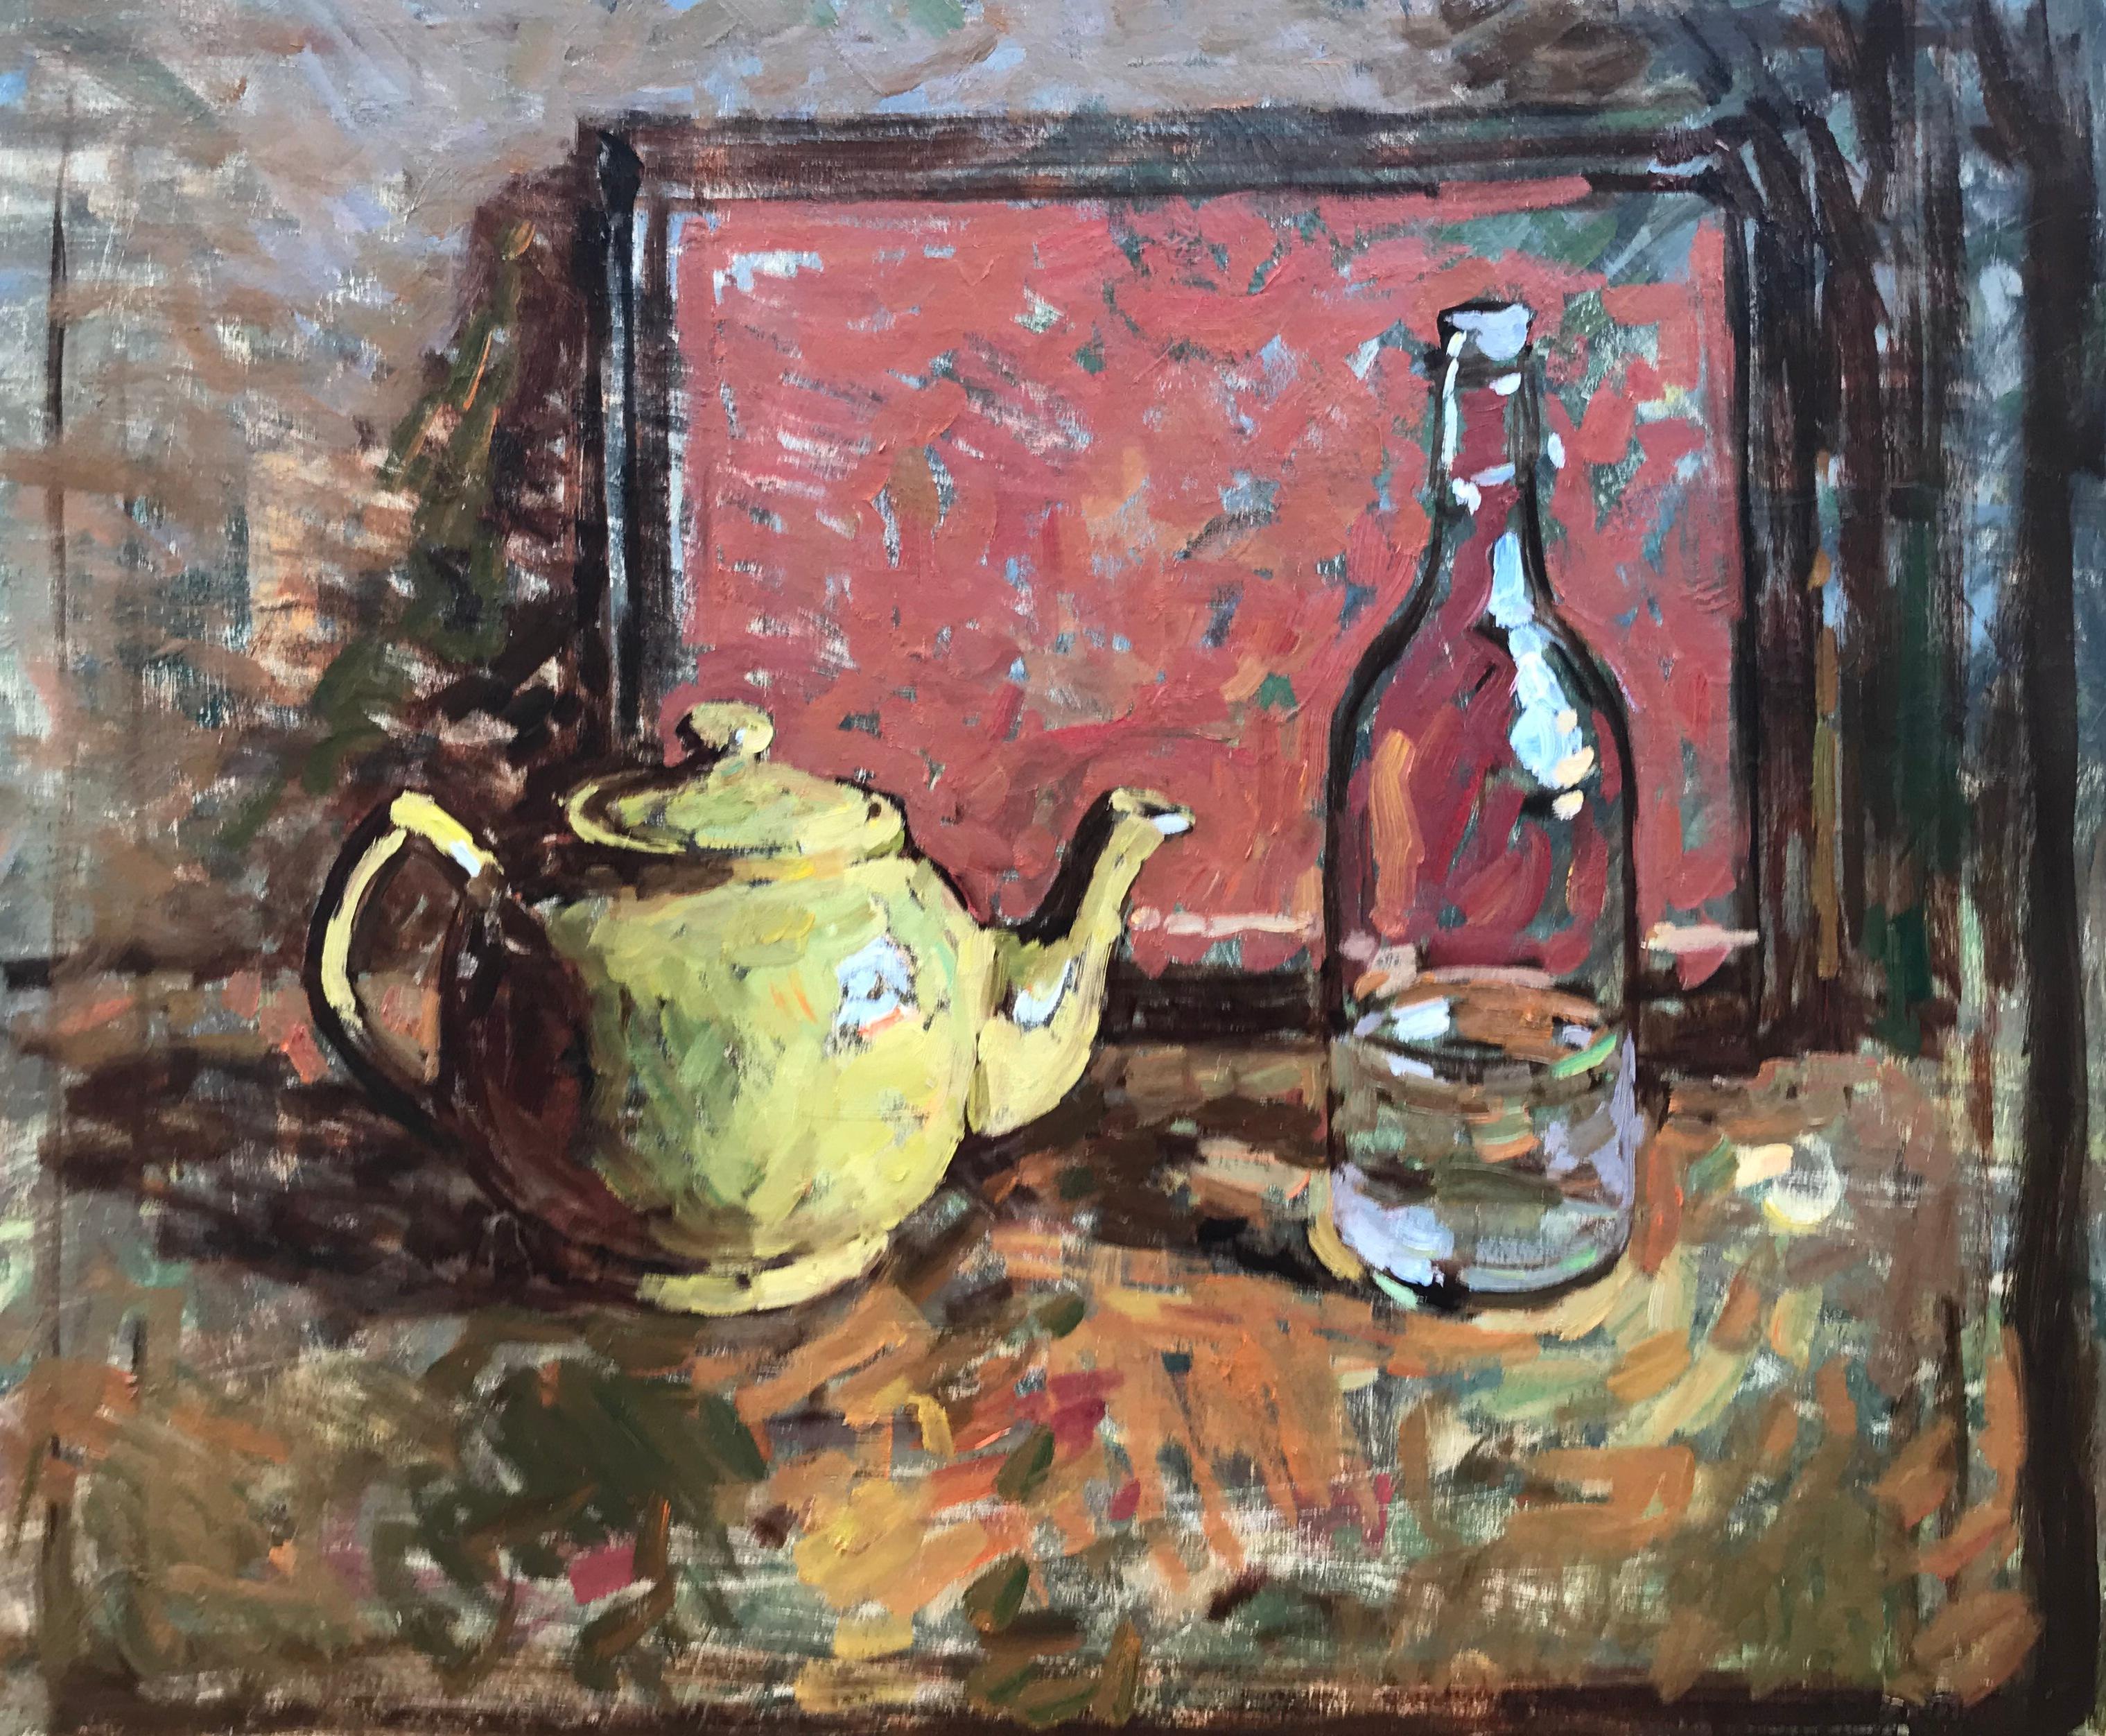 Ben Fenske Interior Painting - "Yellow Teapot" bright impressionist still life with red tray and glass bottle